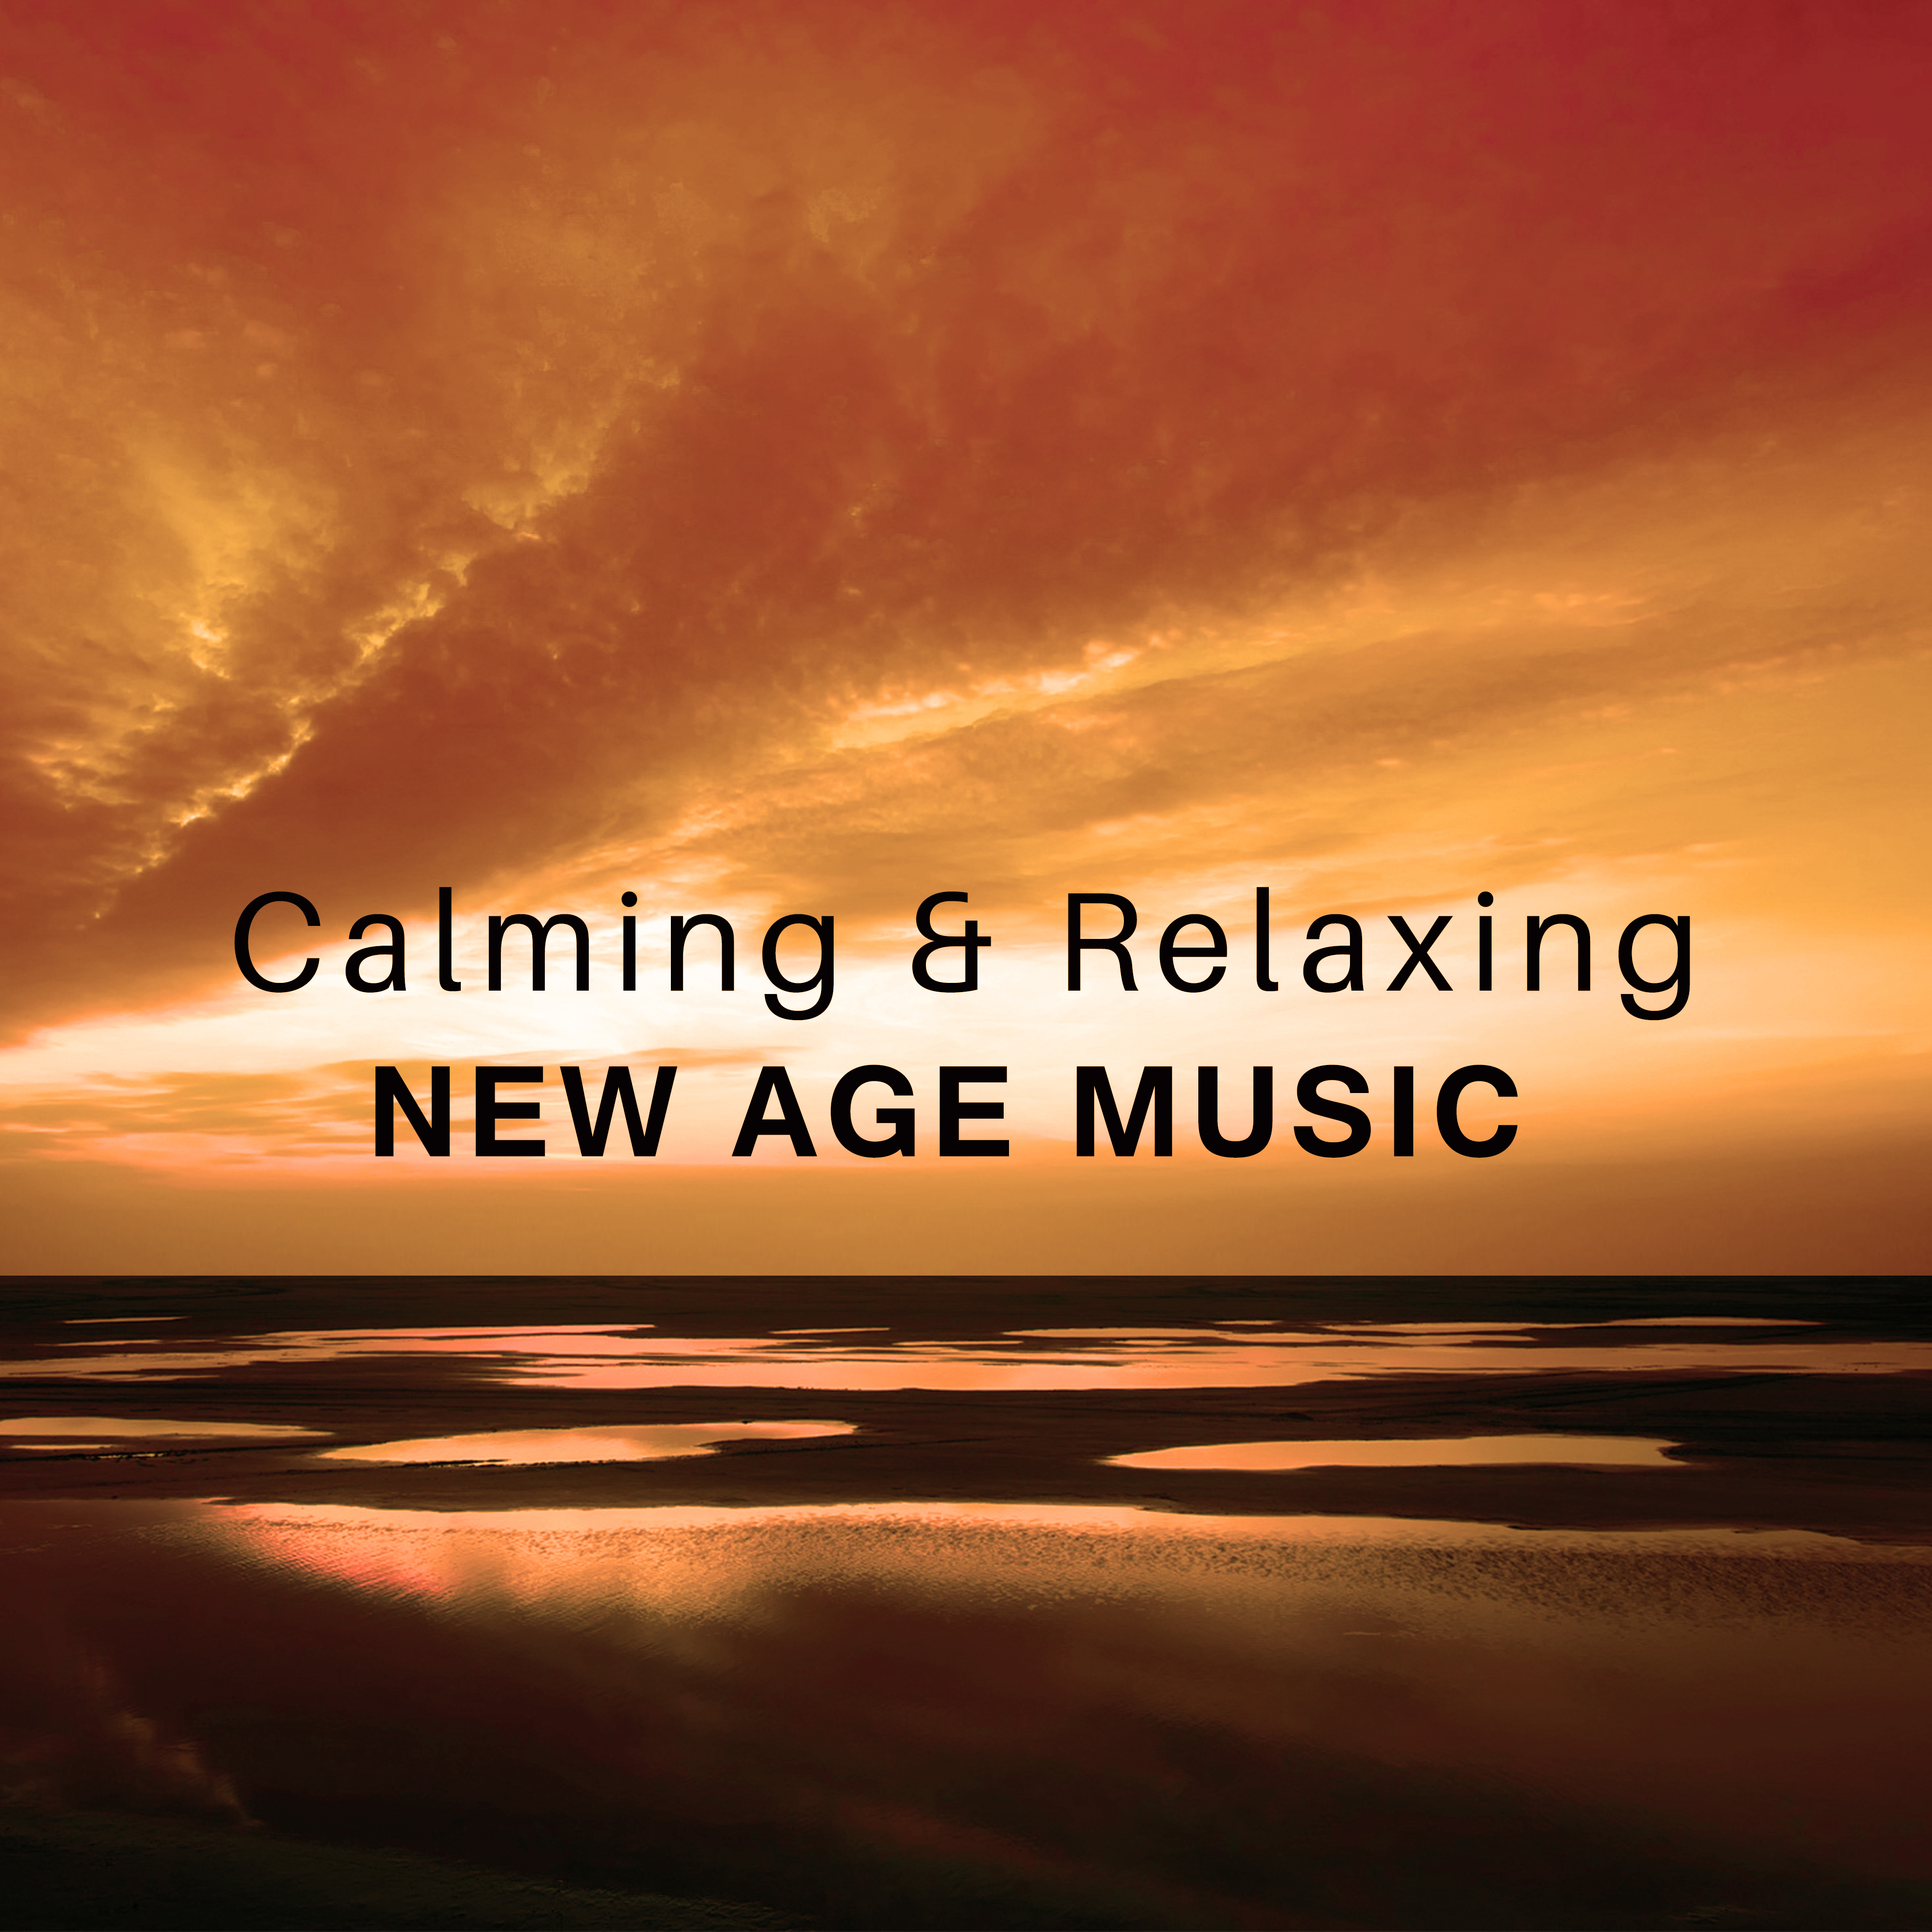 Calming & Relaxing New Age Music – Calm Down & Rest, Spirit Relaxation, Soul Harmony, Chilled Music, Sounds to Relax